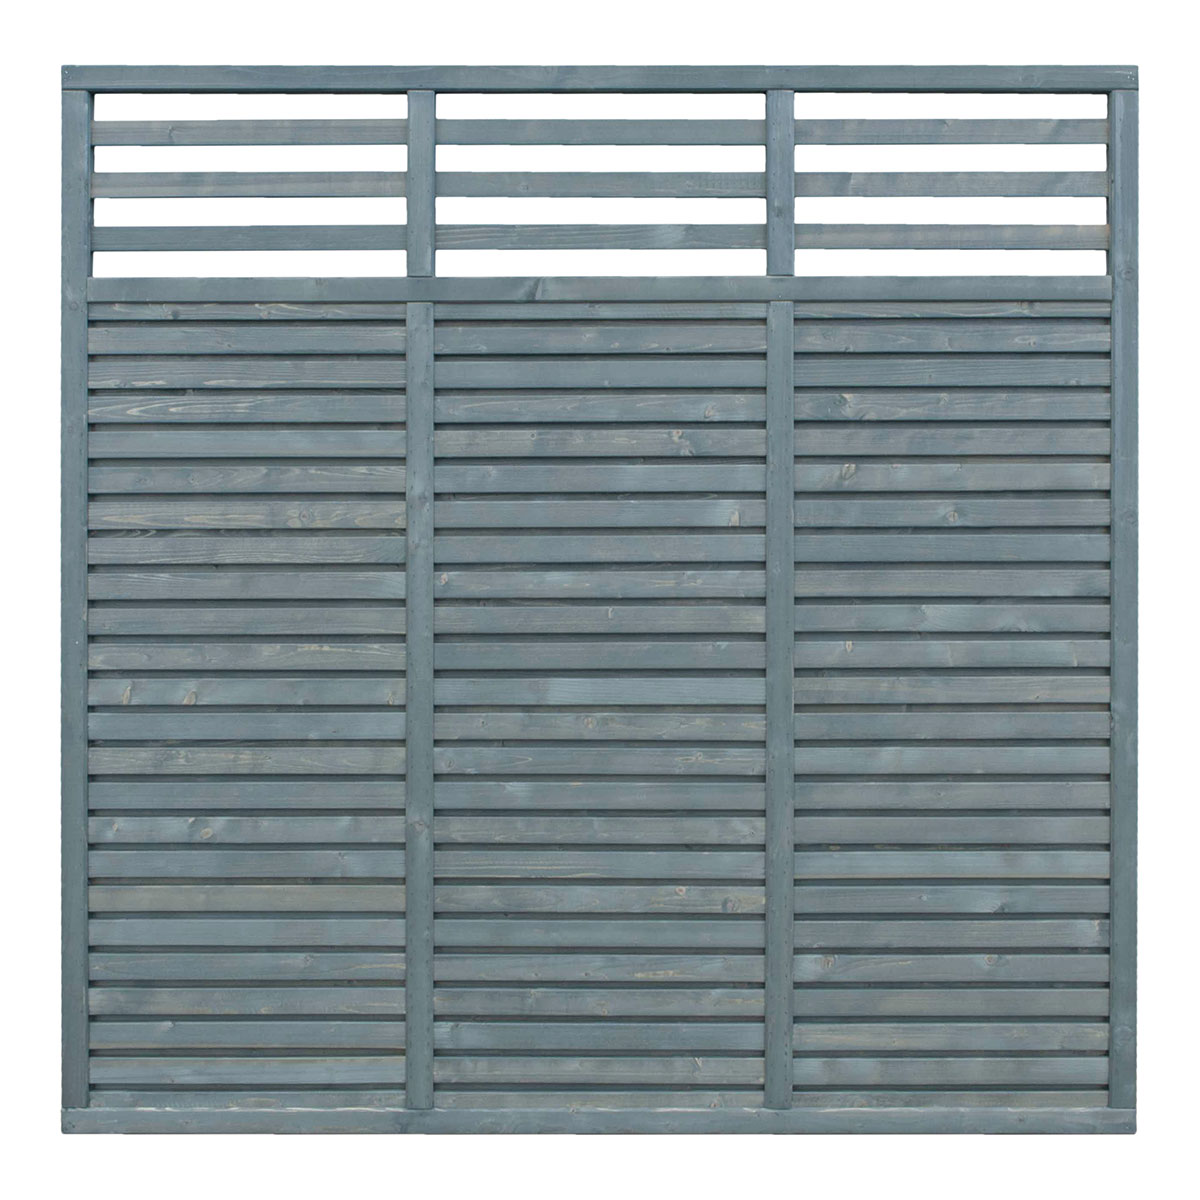 A heavyweight fence panel that combines the functionality and look of the Contemporary Vogue Panel with the added feature of a horizontal style trellis top to create a modern twist on an already popular panel.